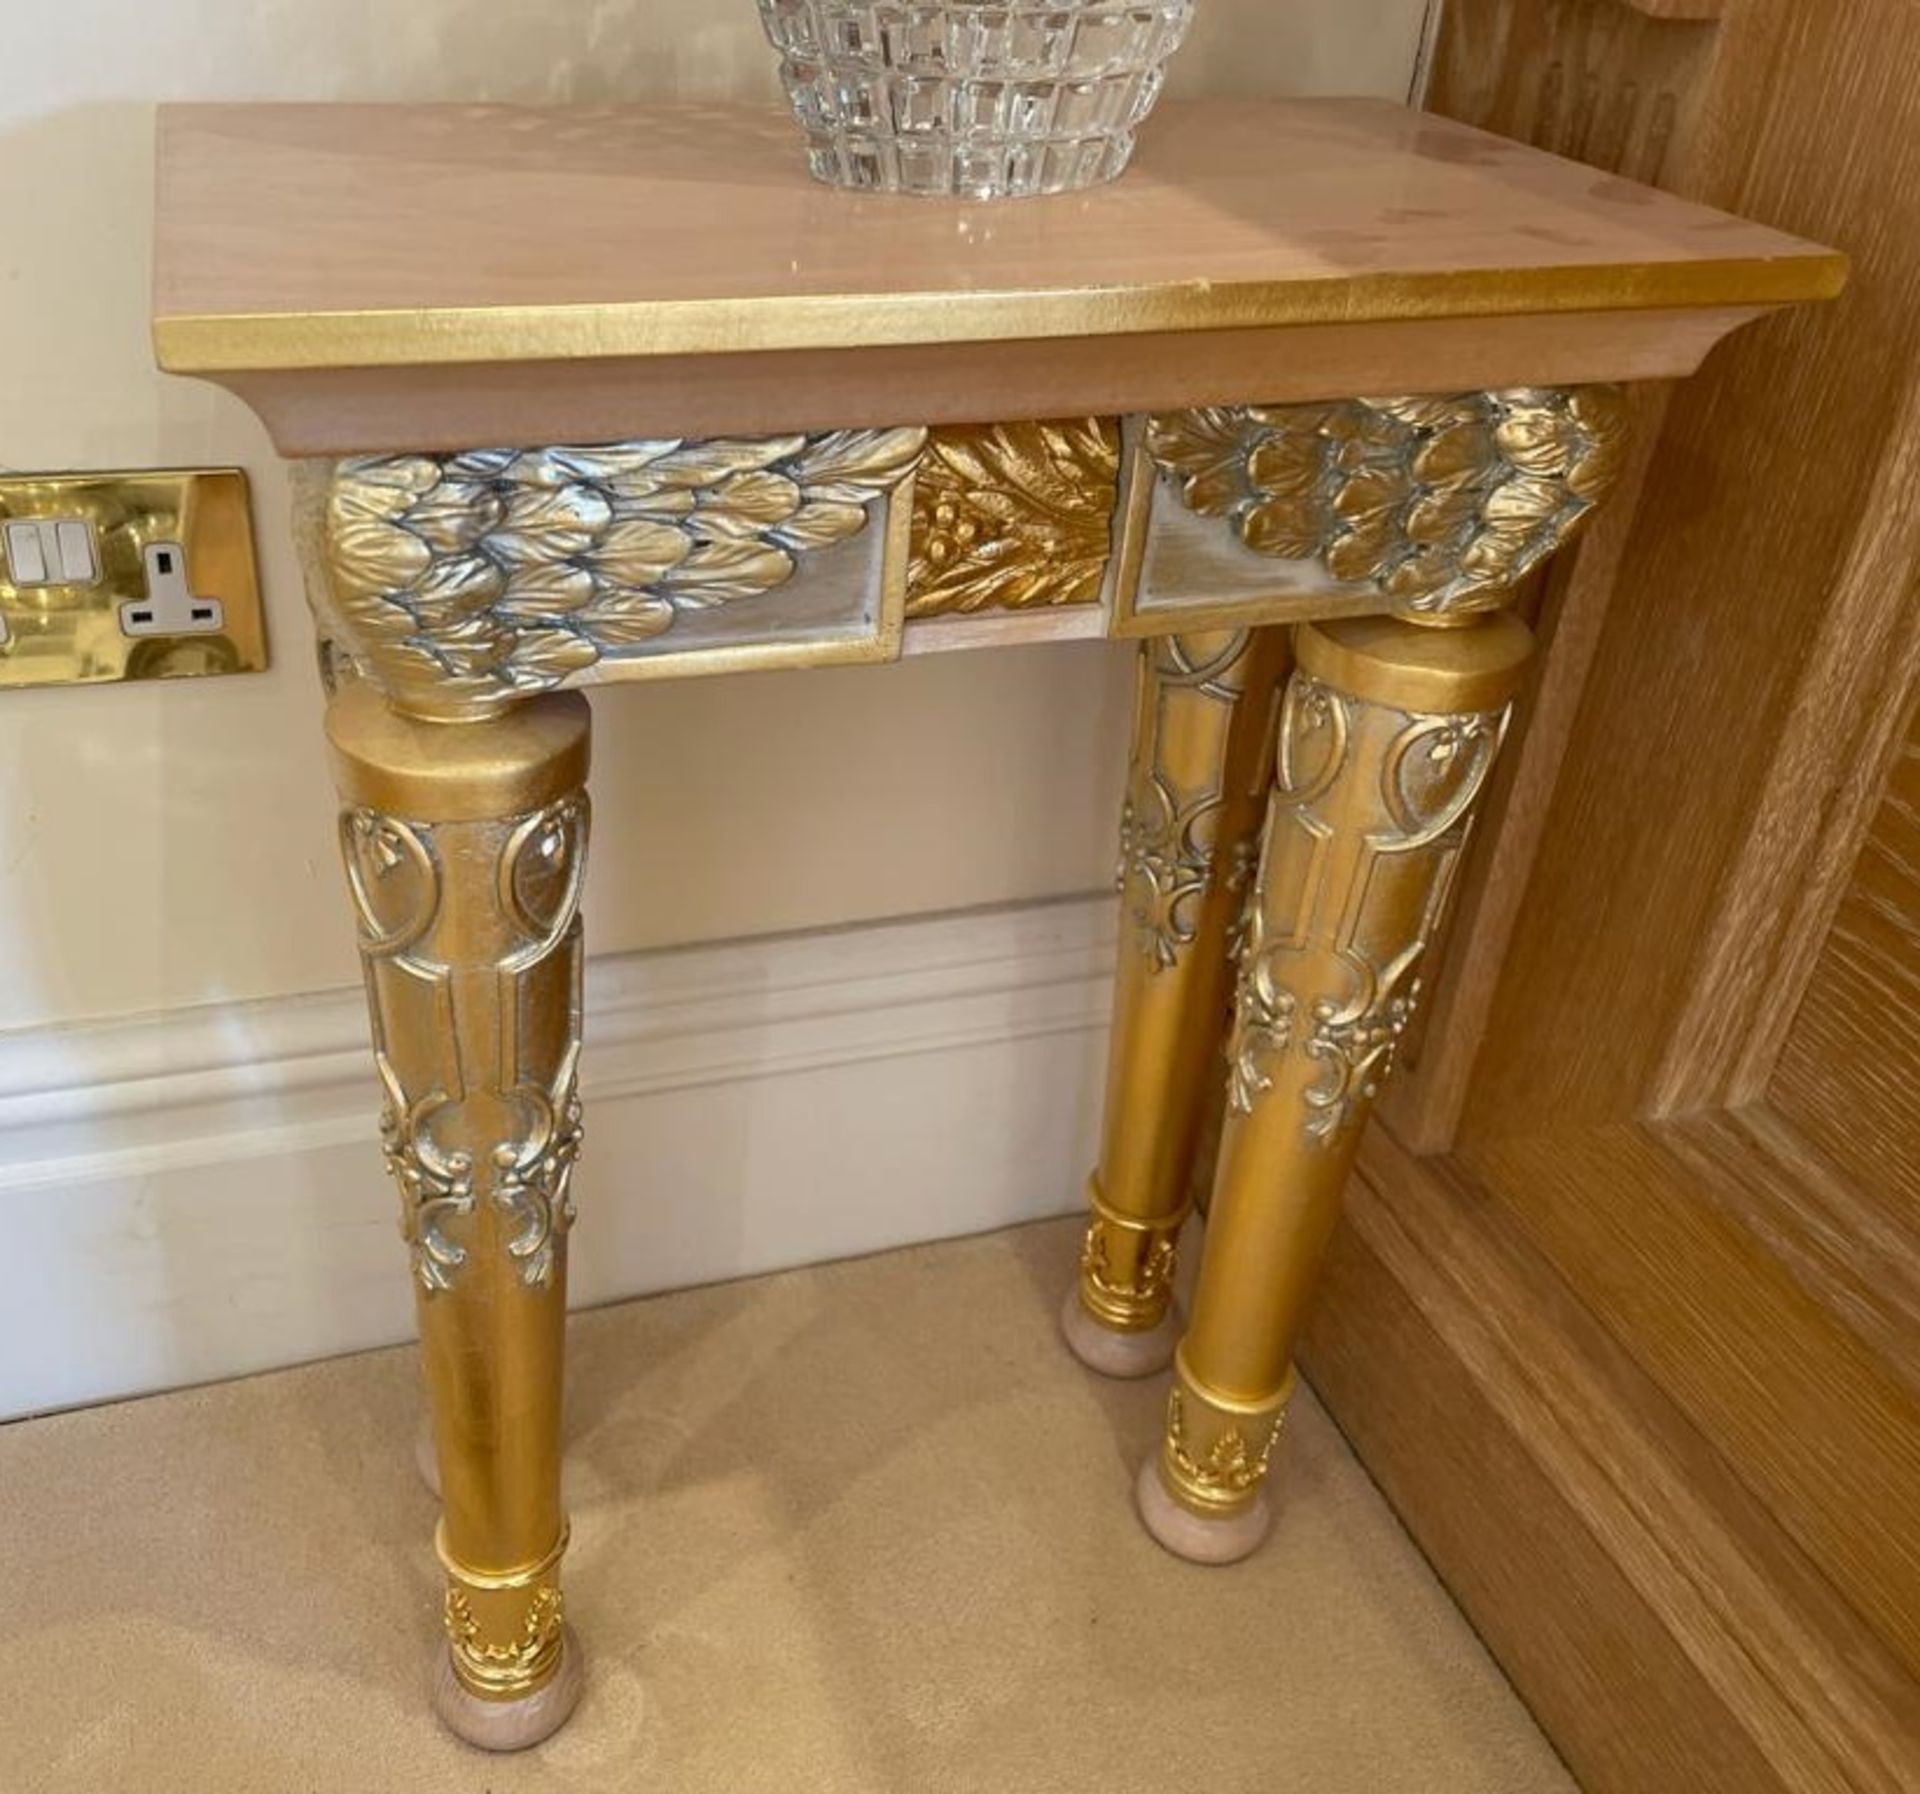 1 x Hand Carved Ornate Lamp Tables Complimented With Birchwood Veneer, Golden Pillar Legs, Carved